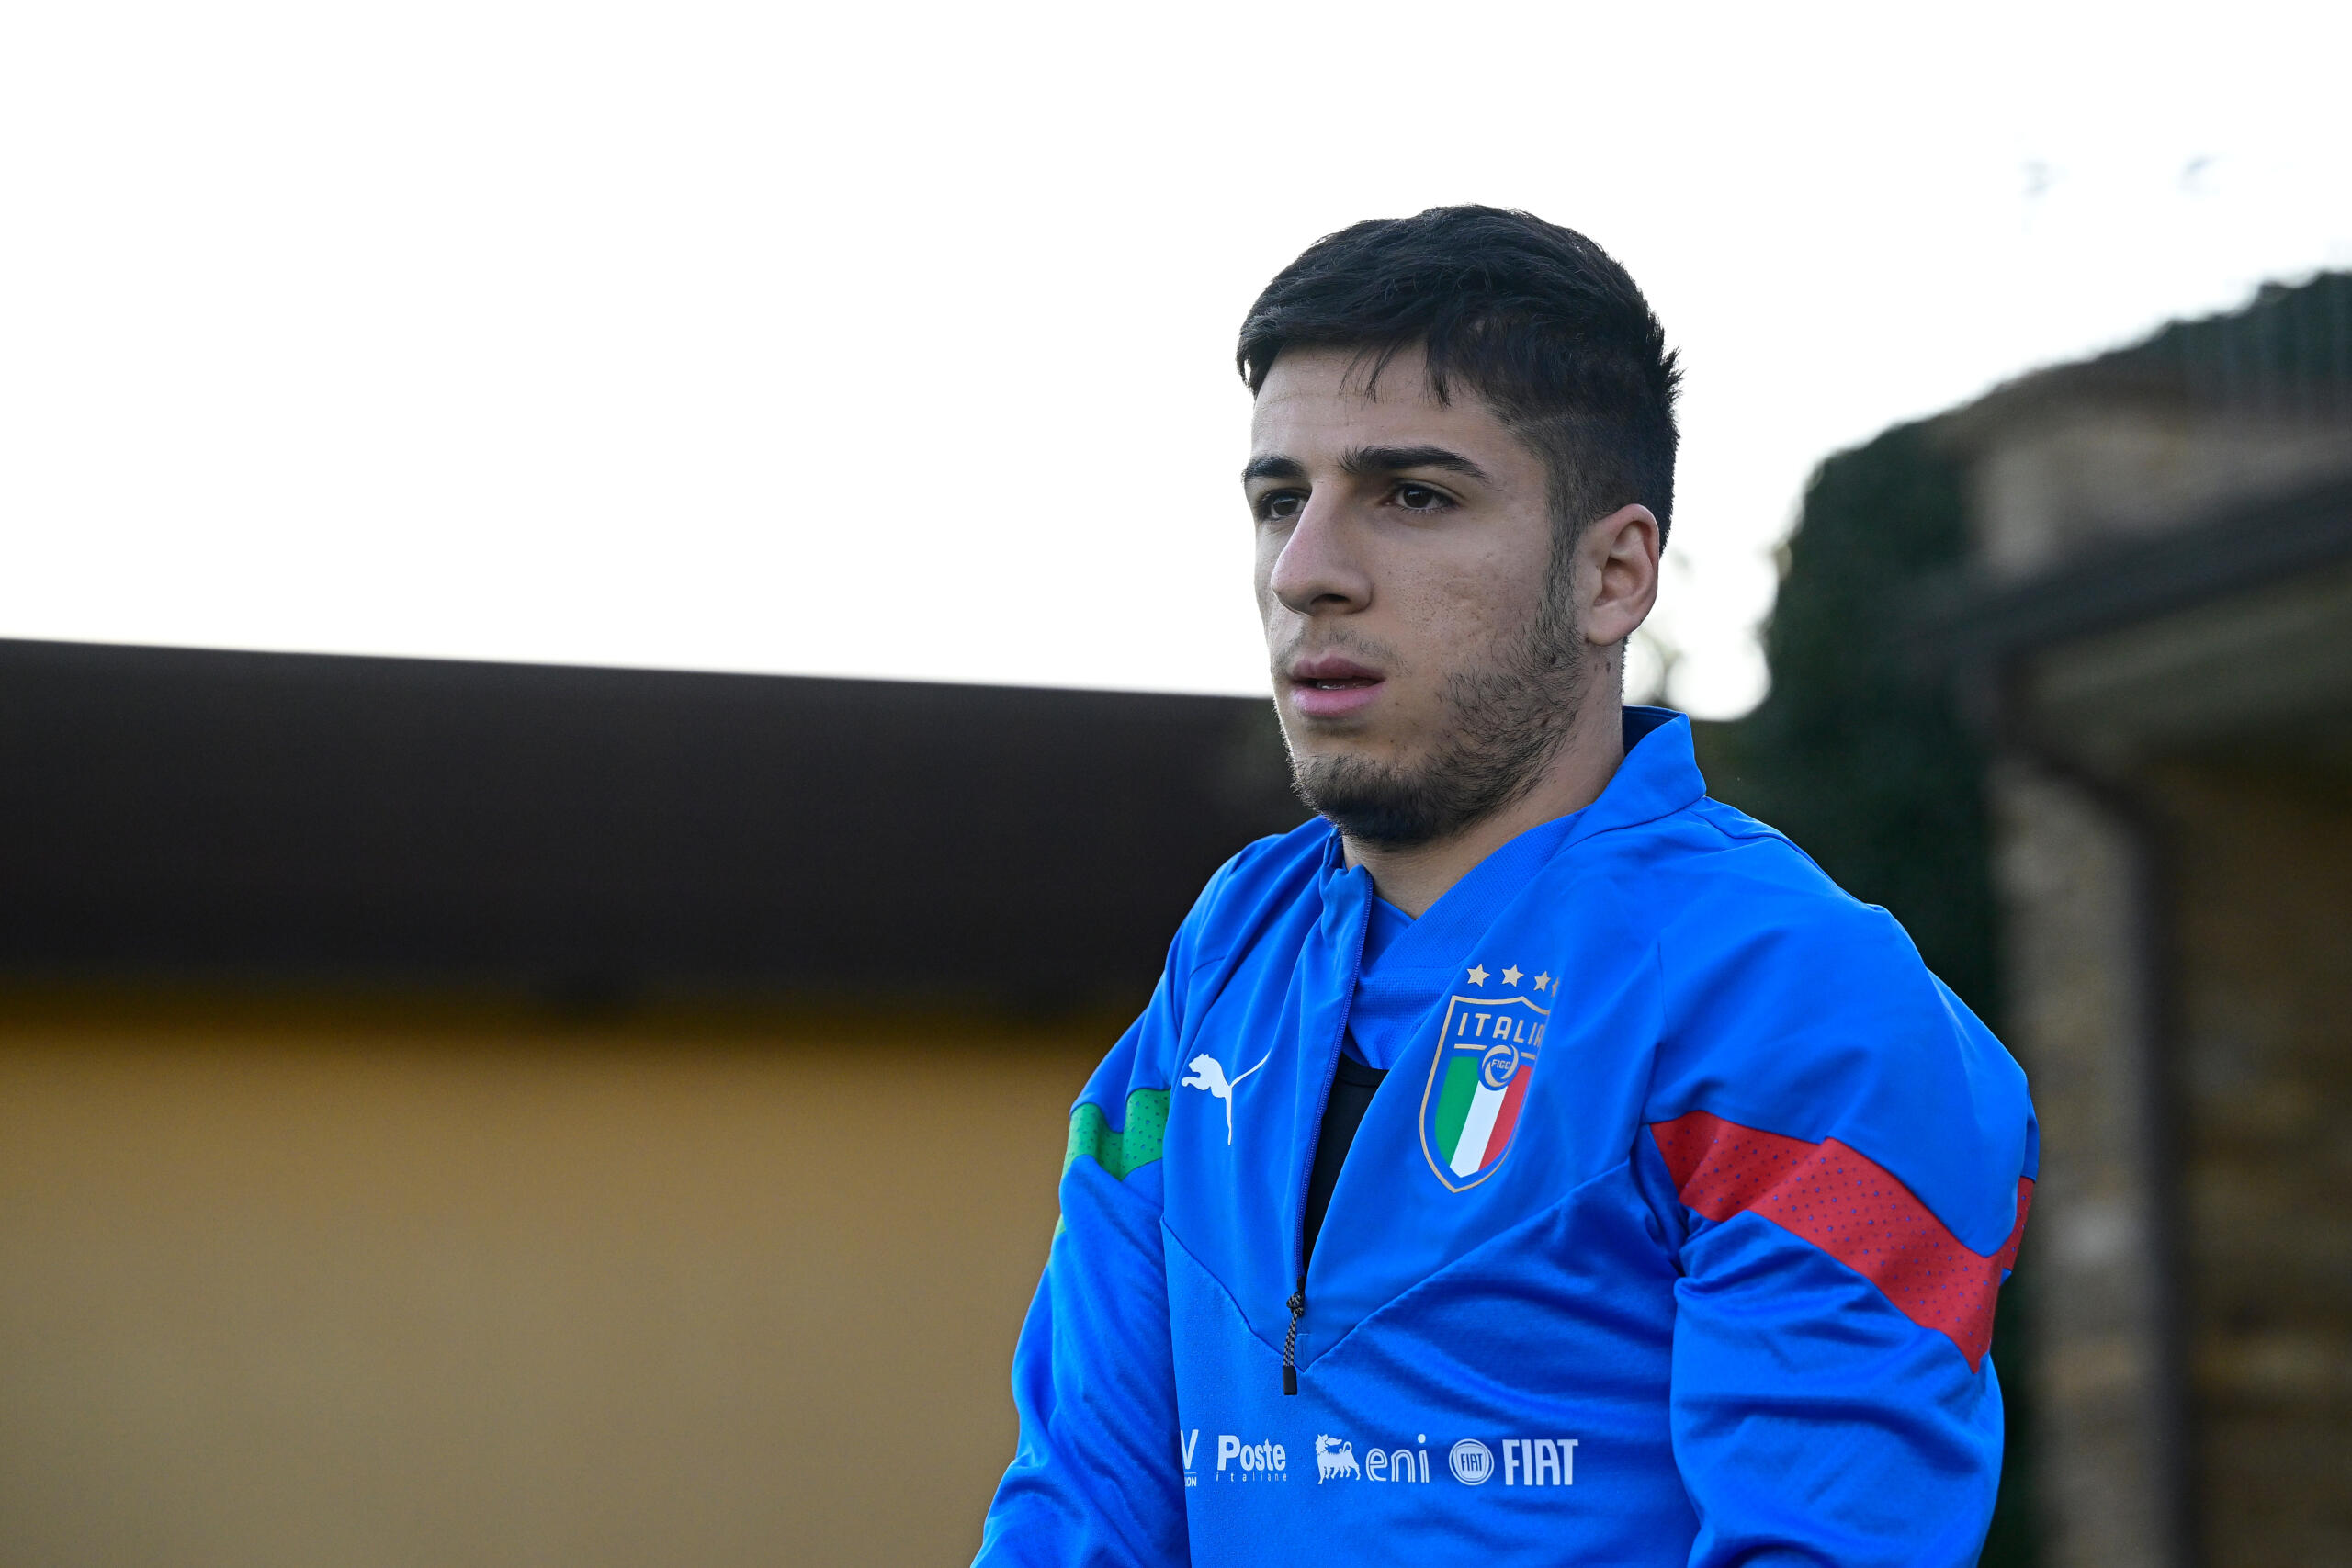 Juventus have laid eyes on Fabiano Parisi, but they need a few pieces to fit into the right place before kicking their chase into high gear.